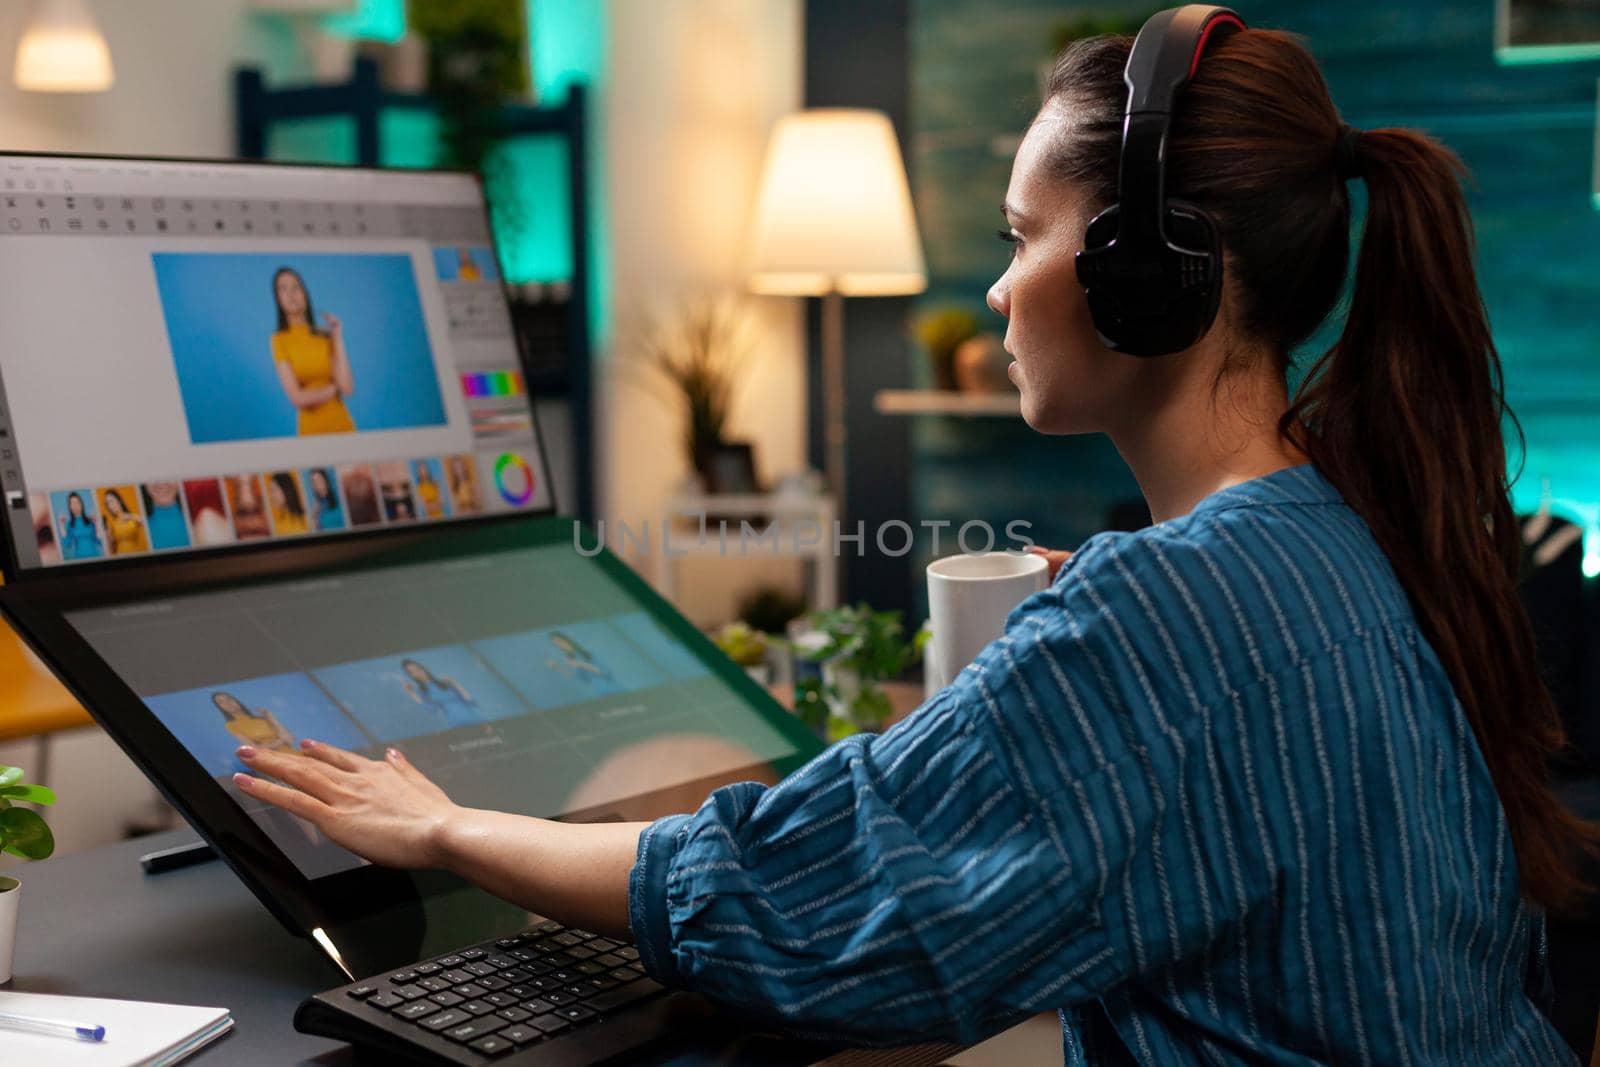 Woman with editor occupation wearing headphones by DCStudio